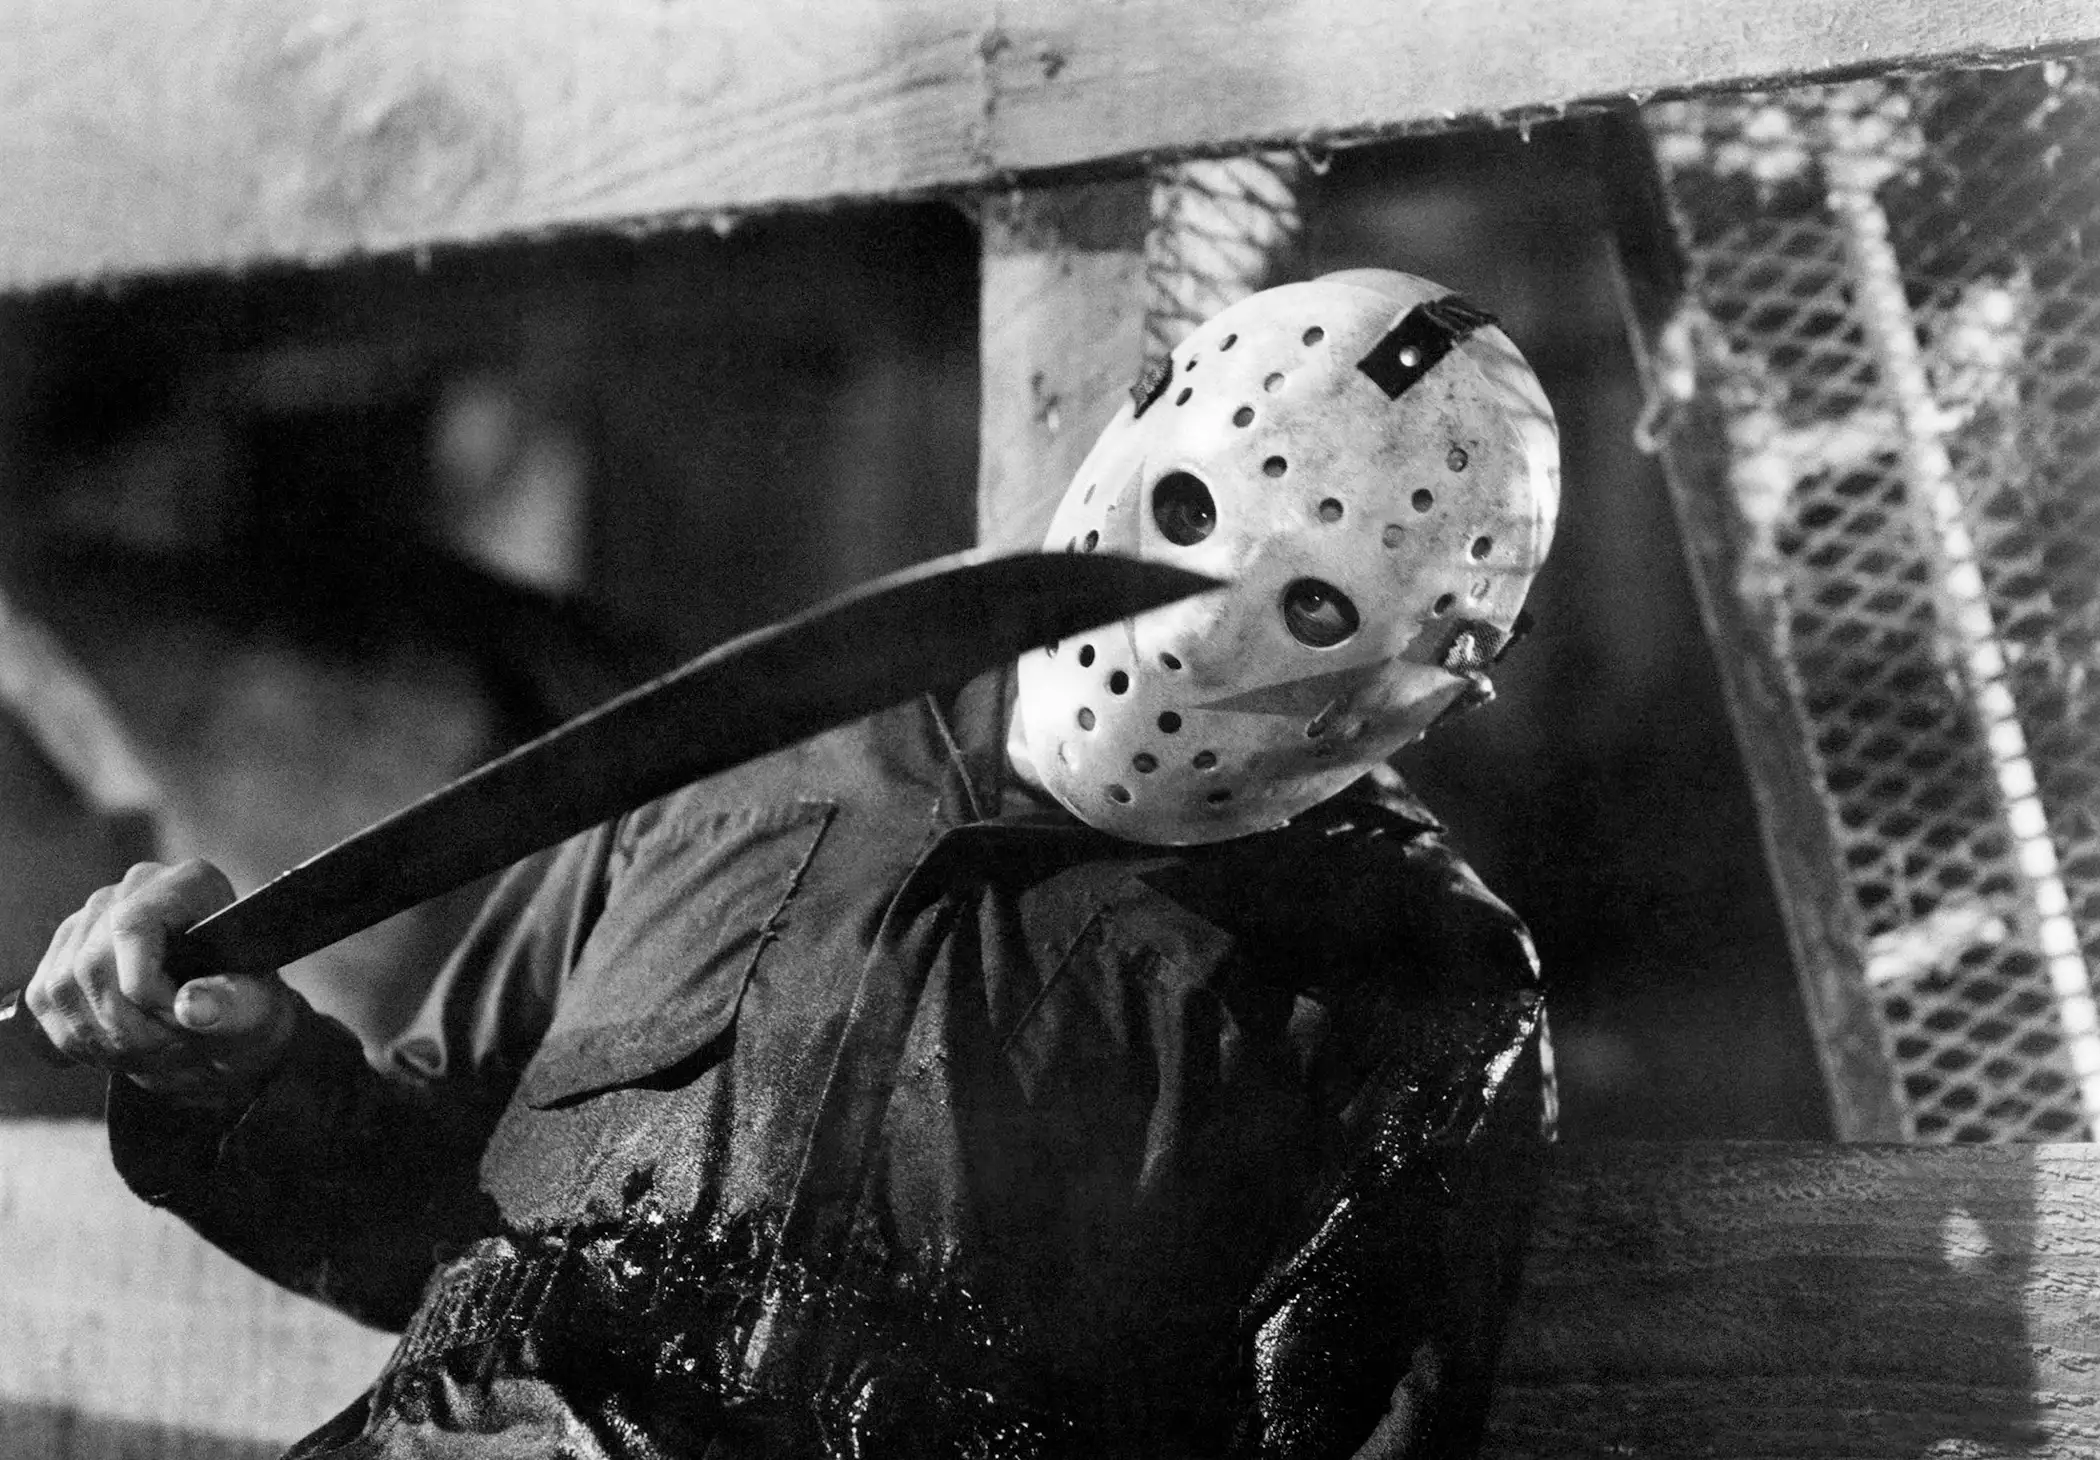 Friday The 13th: A New Beginning (1985)